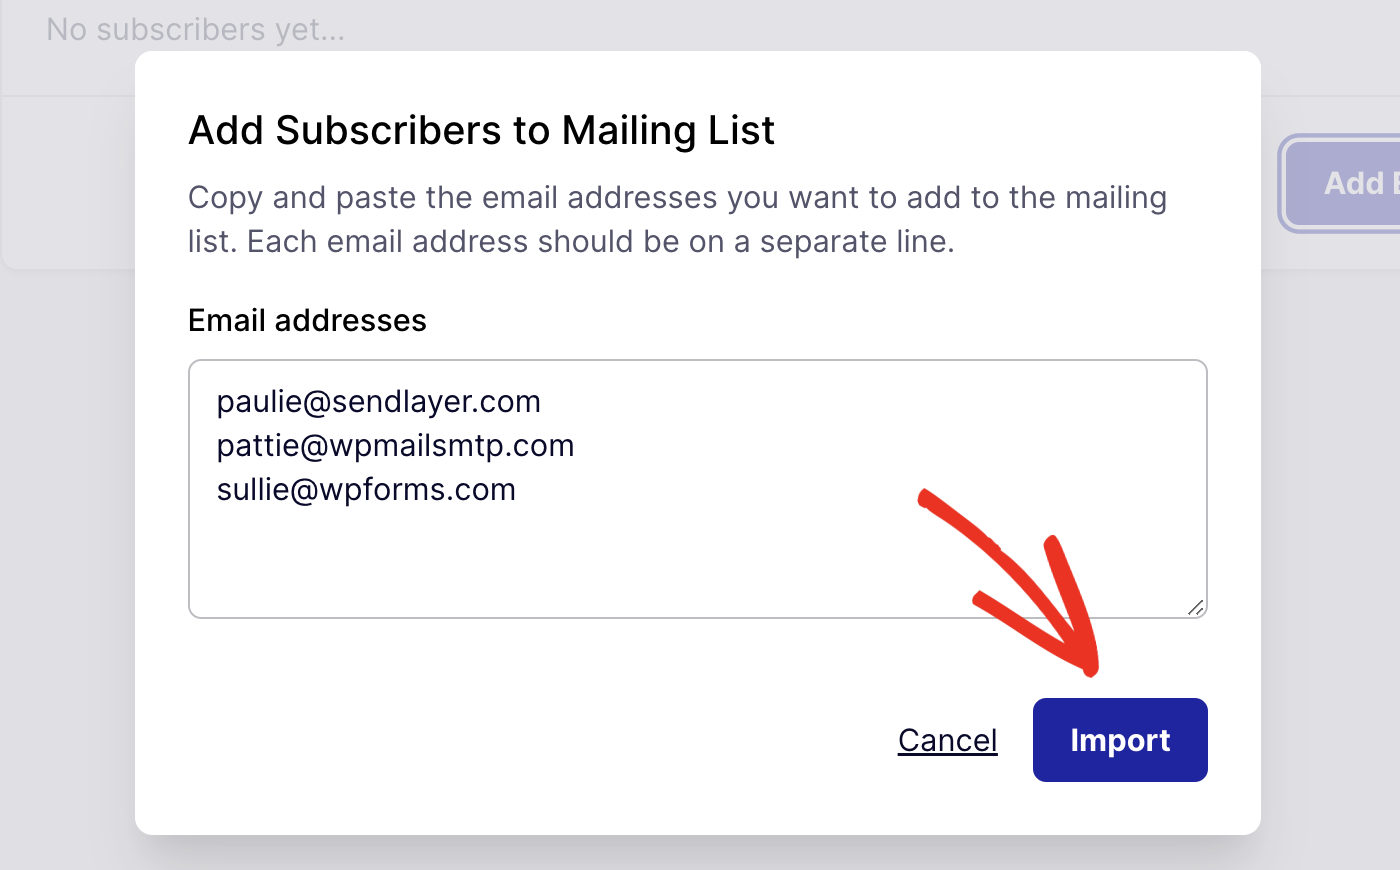 Importing email addresses to a mailing list